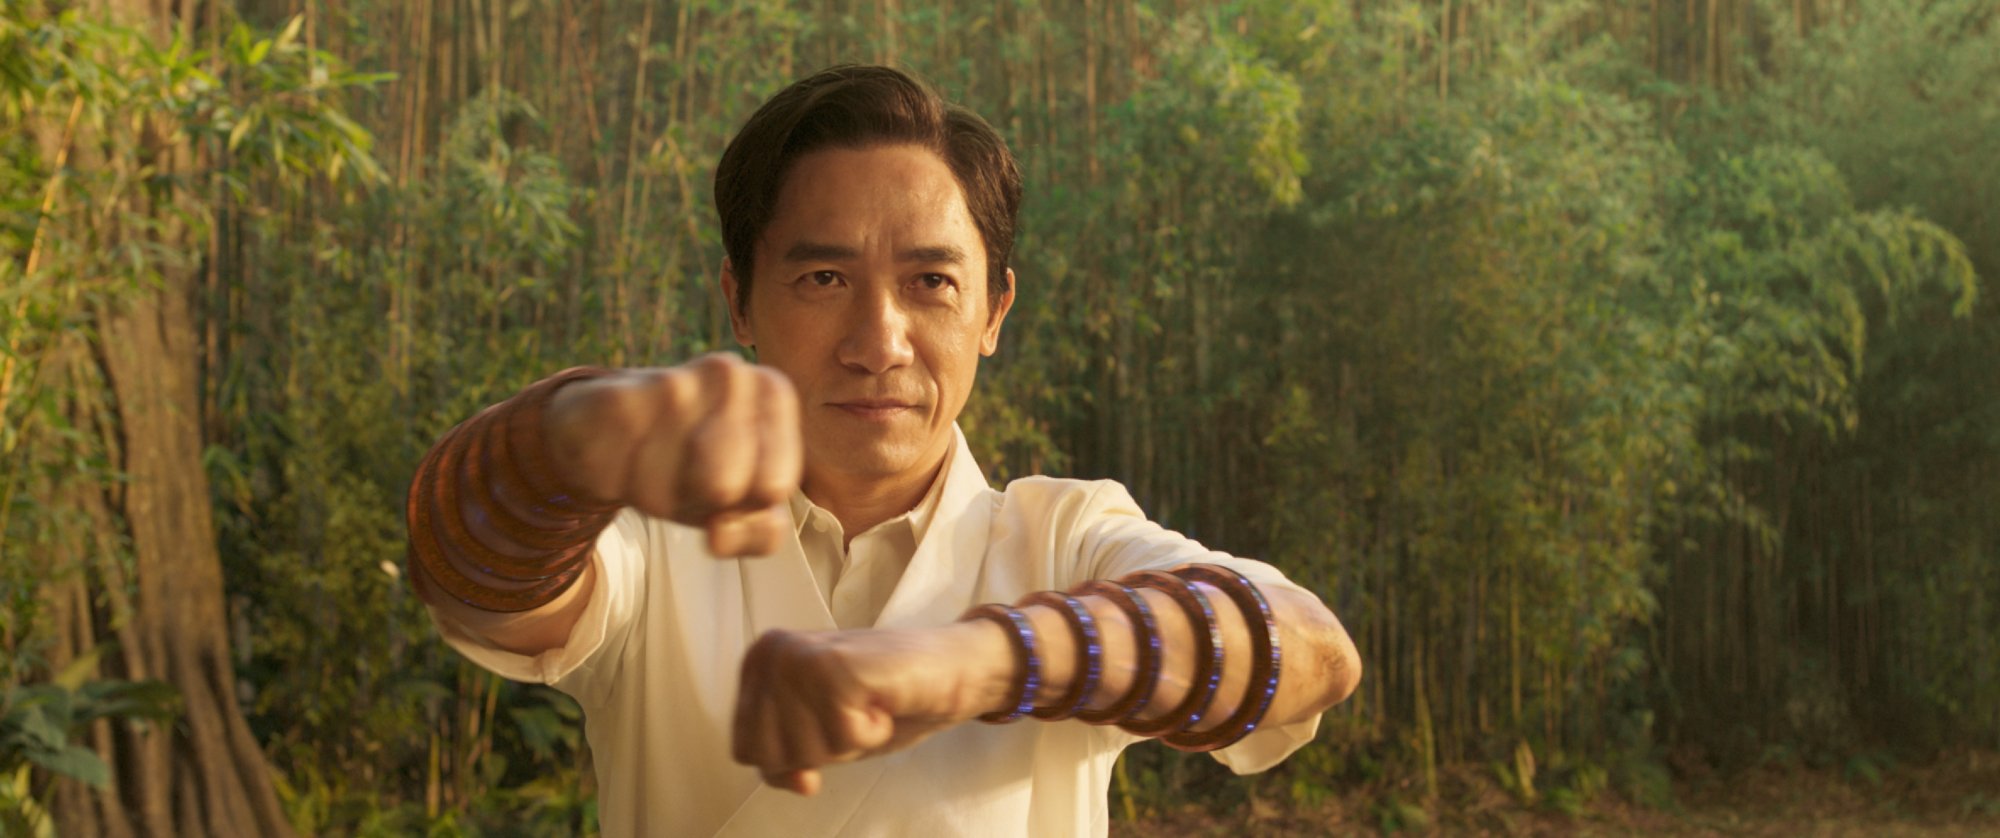 Tony Leung as Wenwu in 'Shang-Chi and the Legend of the Ten Rings'